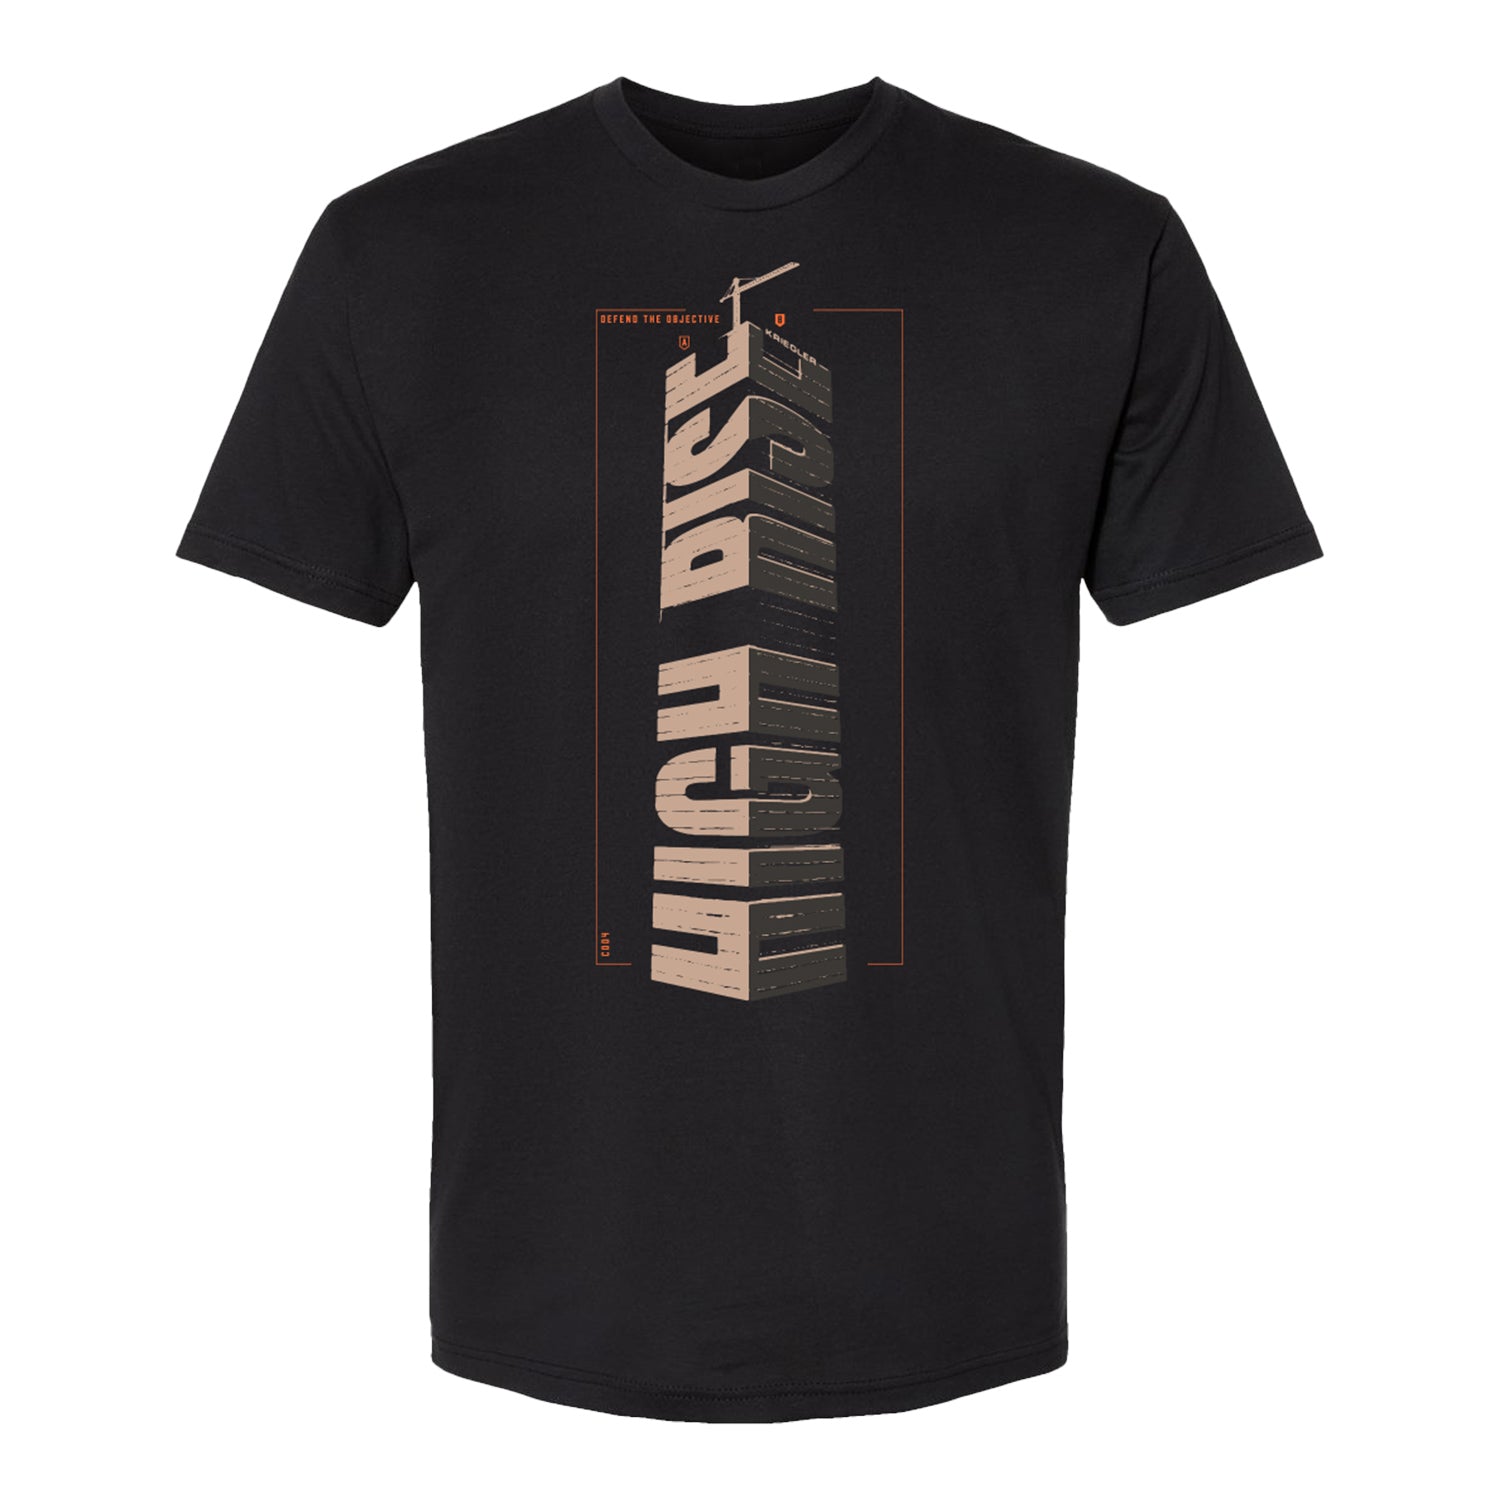 Call of Duty Black High Rise T-Shirt - Front View Black Version